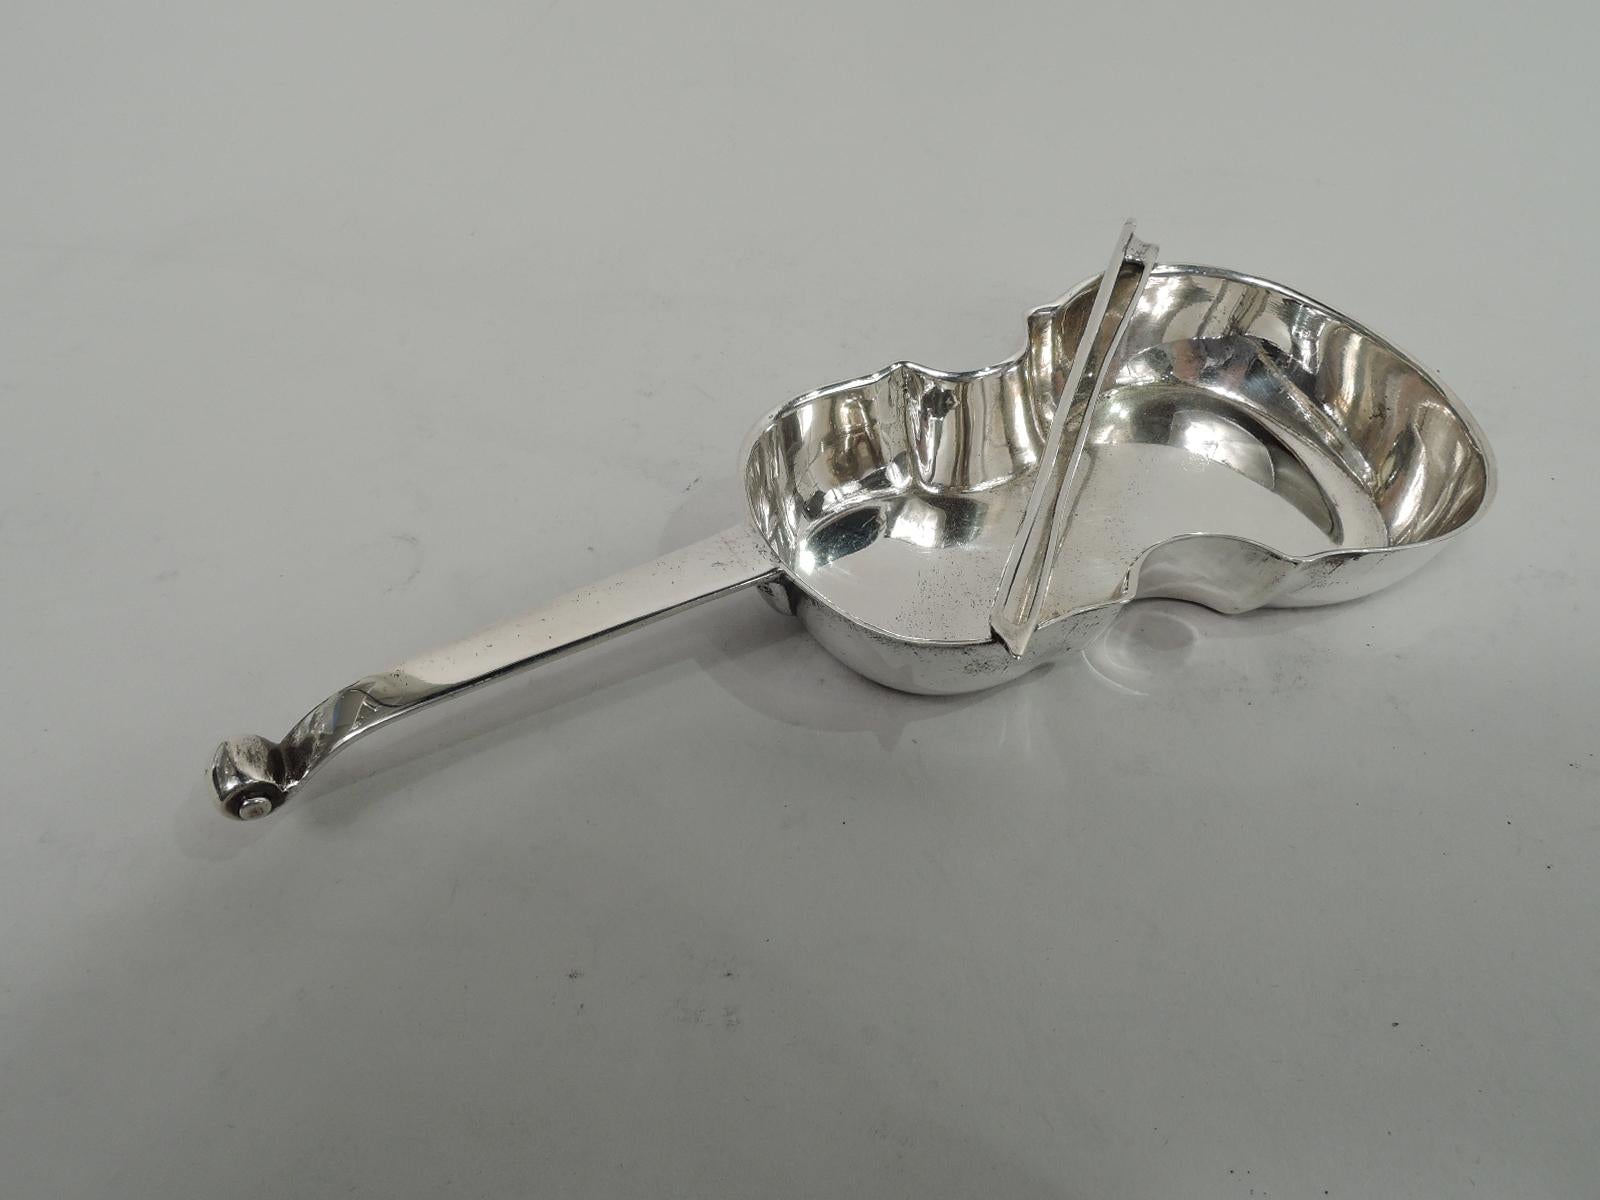 Edwardian sterling silver figural musical instrument dish. Made by John Thomas Heath & John Hartshorne Middleton in Birmingham in 1907. In form of cello with bow fixed diagonally. A sweet novelty. Fully marked. Weight: 3 troy ounces.